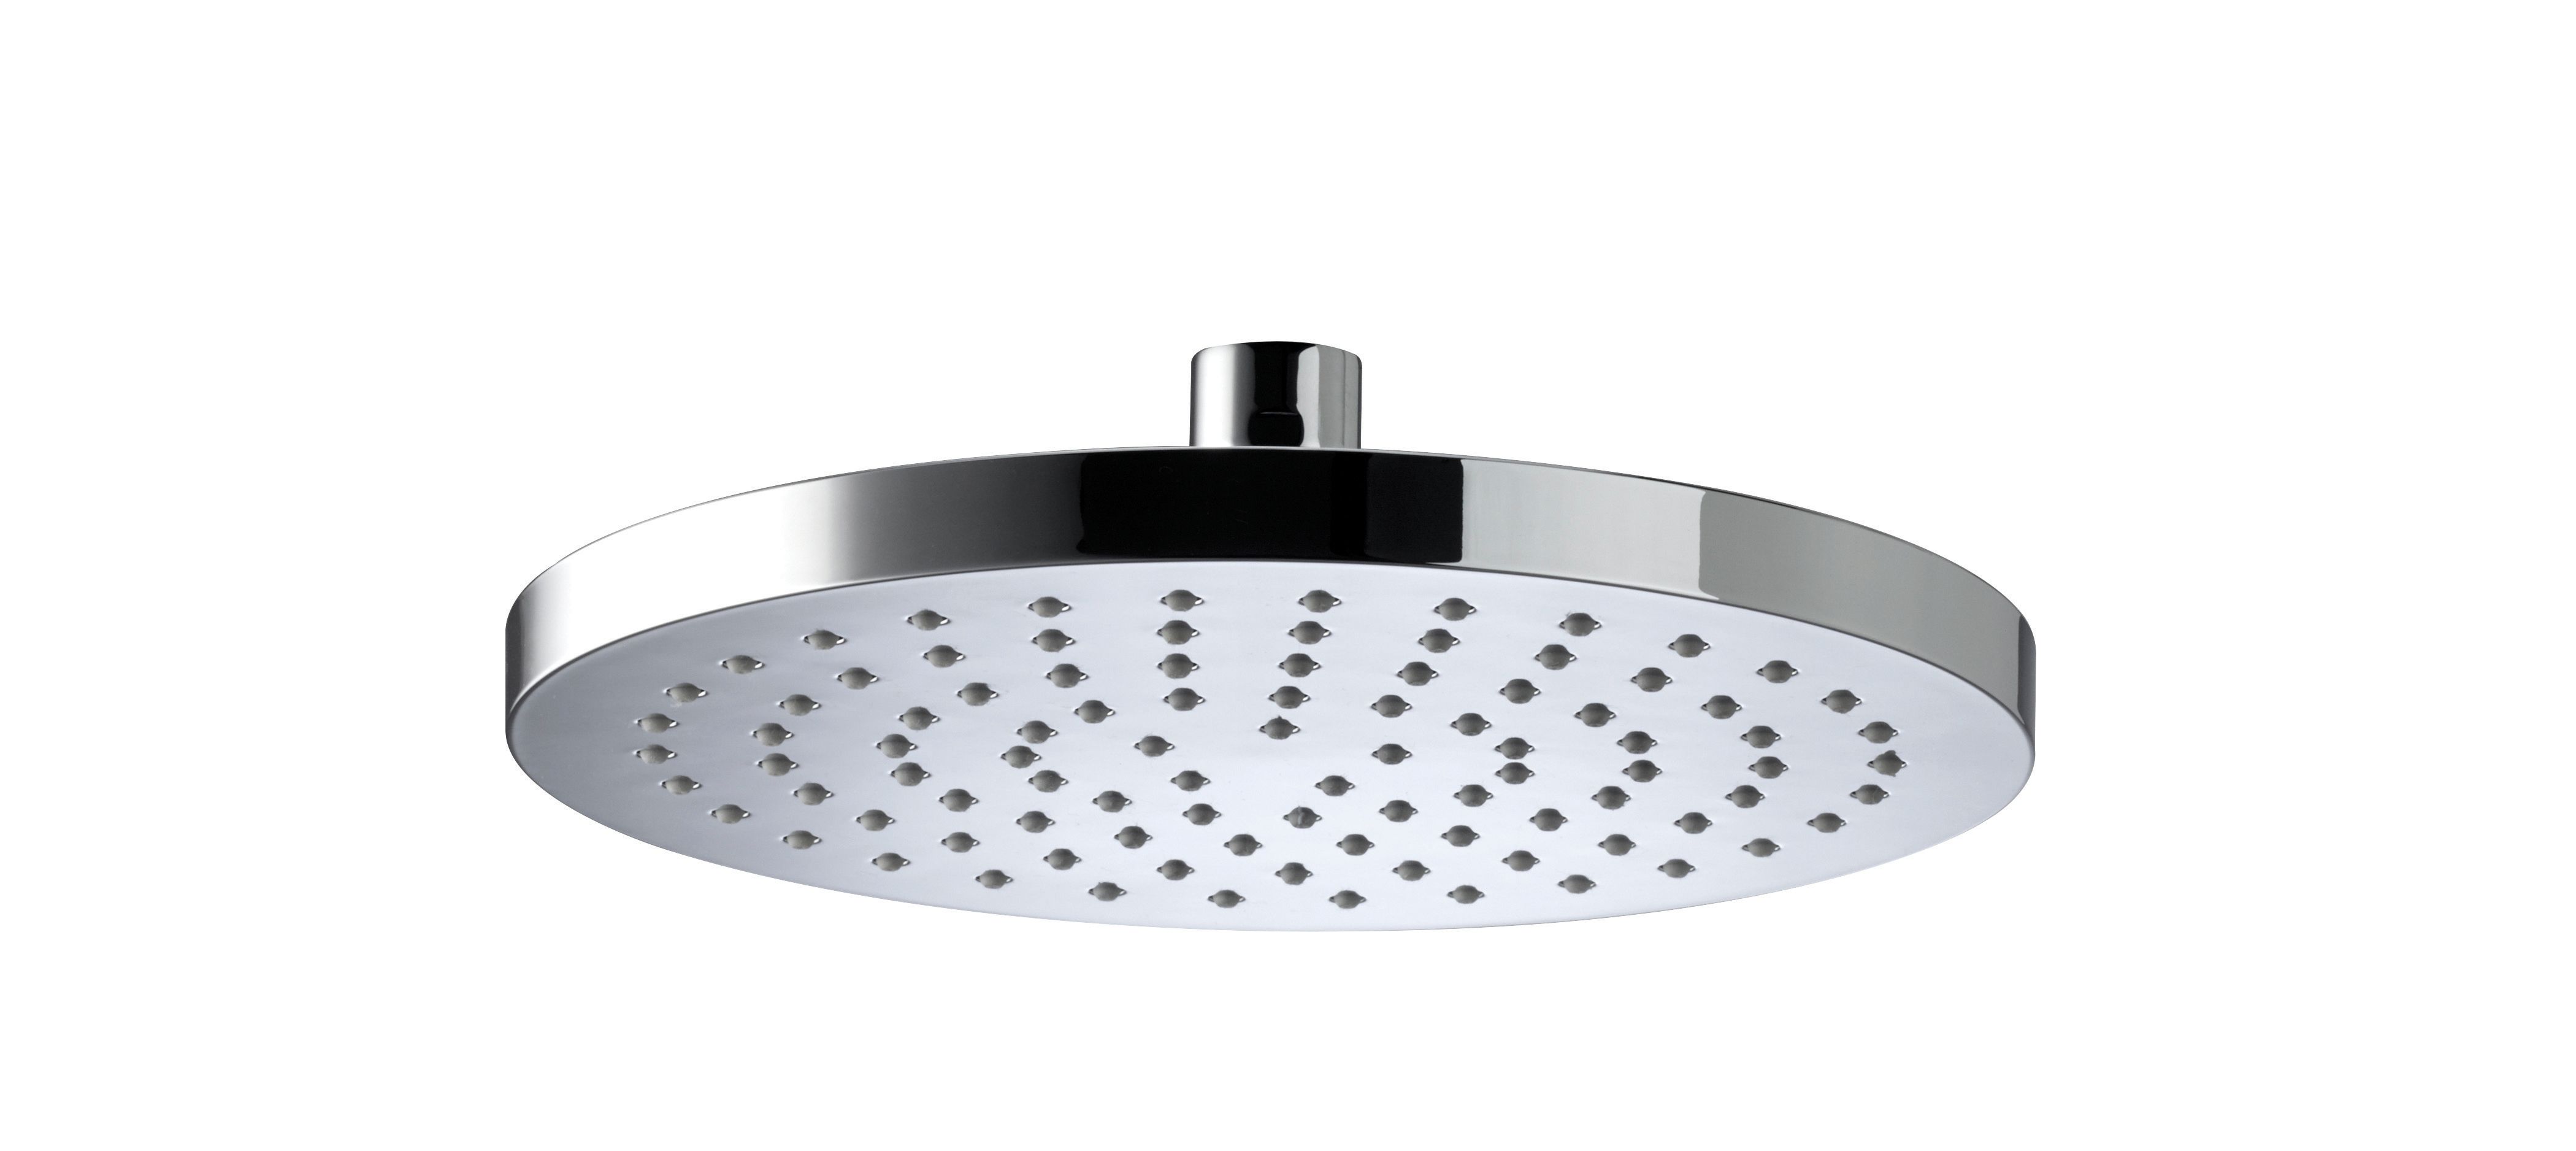 Image of Bristan Round Wall Mounted Chrome Shower Head & Arm - 200mm